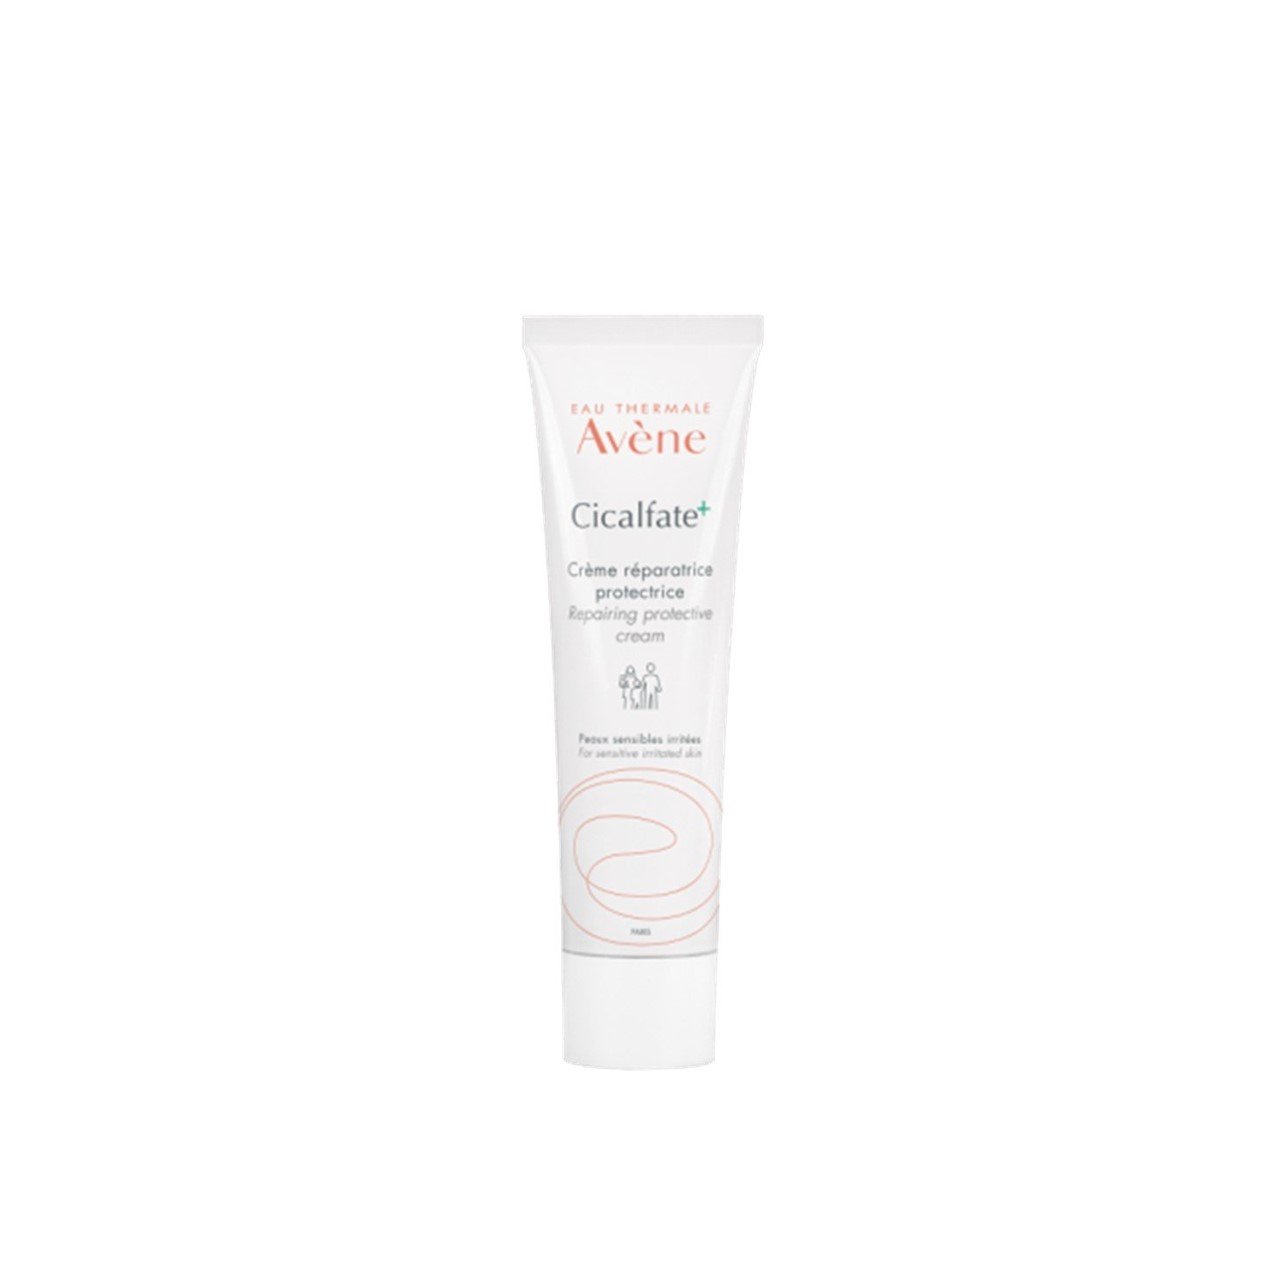 Buy Avène Cicalfate+ Repairing Protective Cream 100ml · World Wide